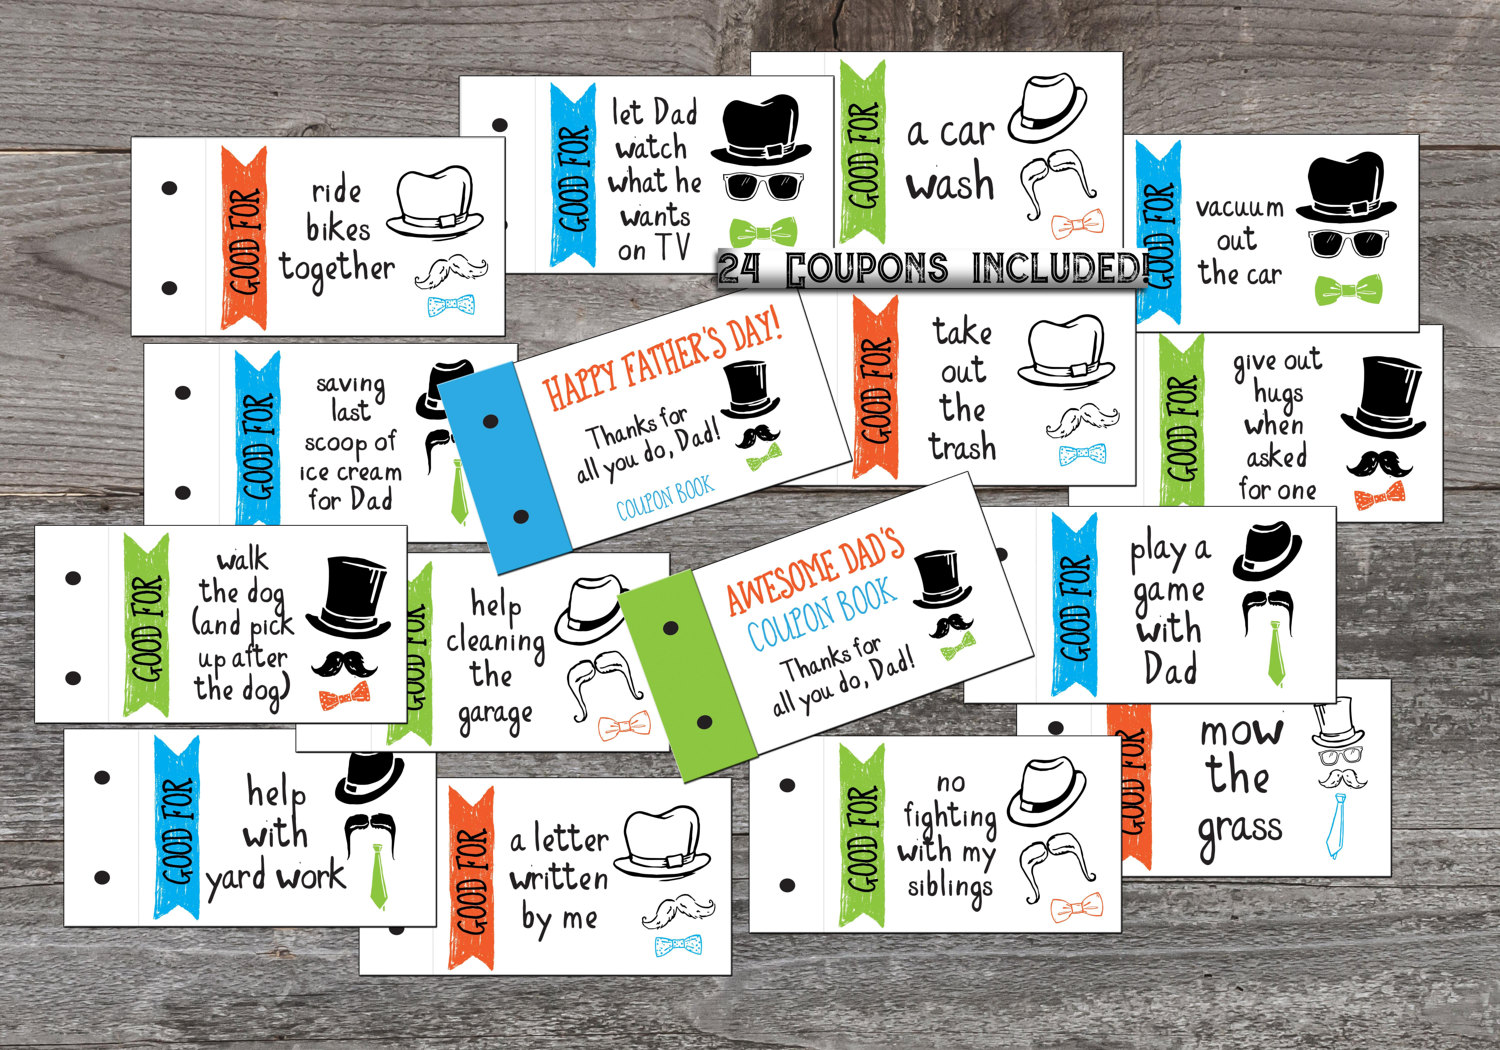 Coupon book handmade gifts to give on Fathers Day